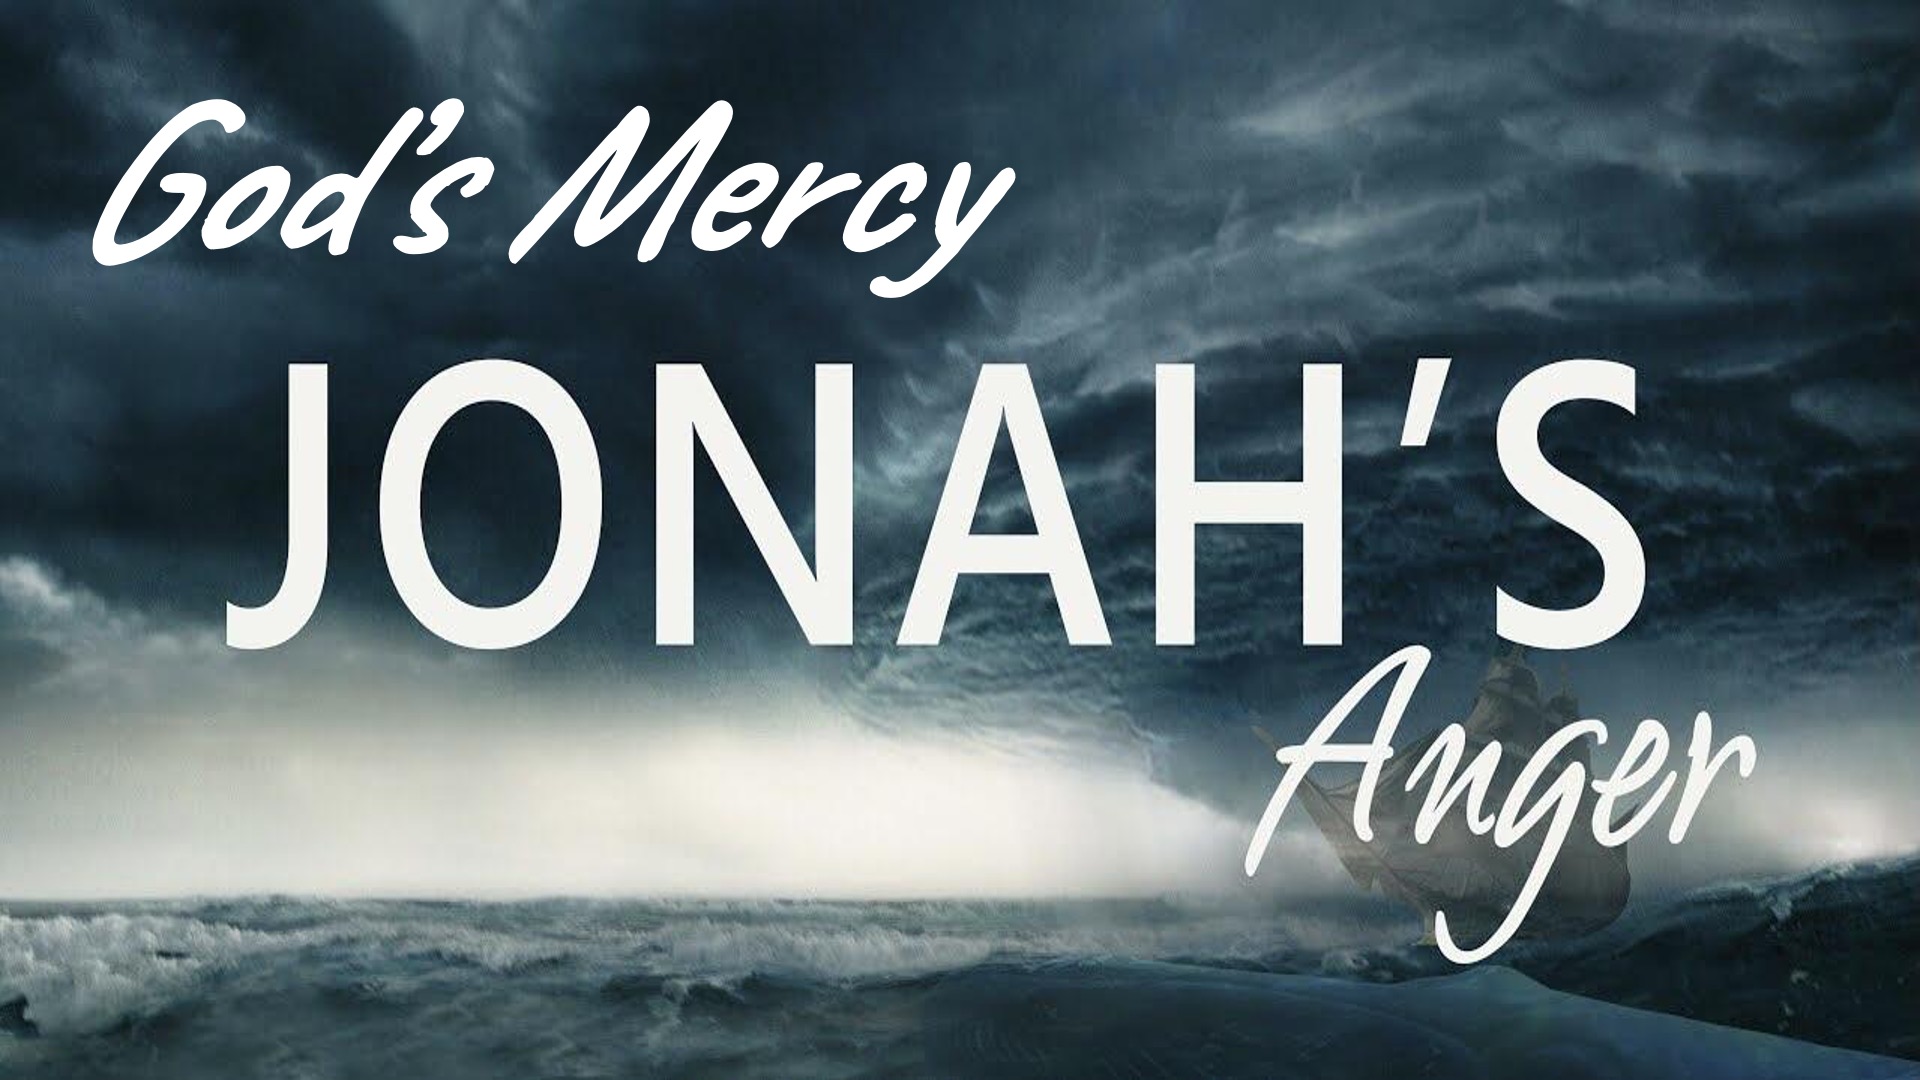 Jonah's Anger and God's Mercy